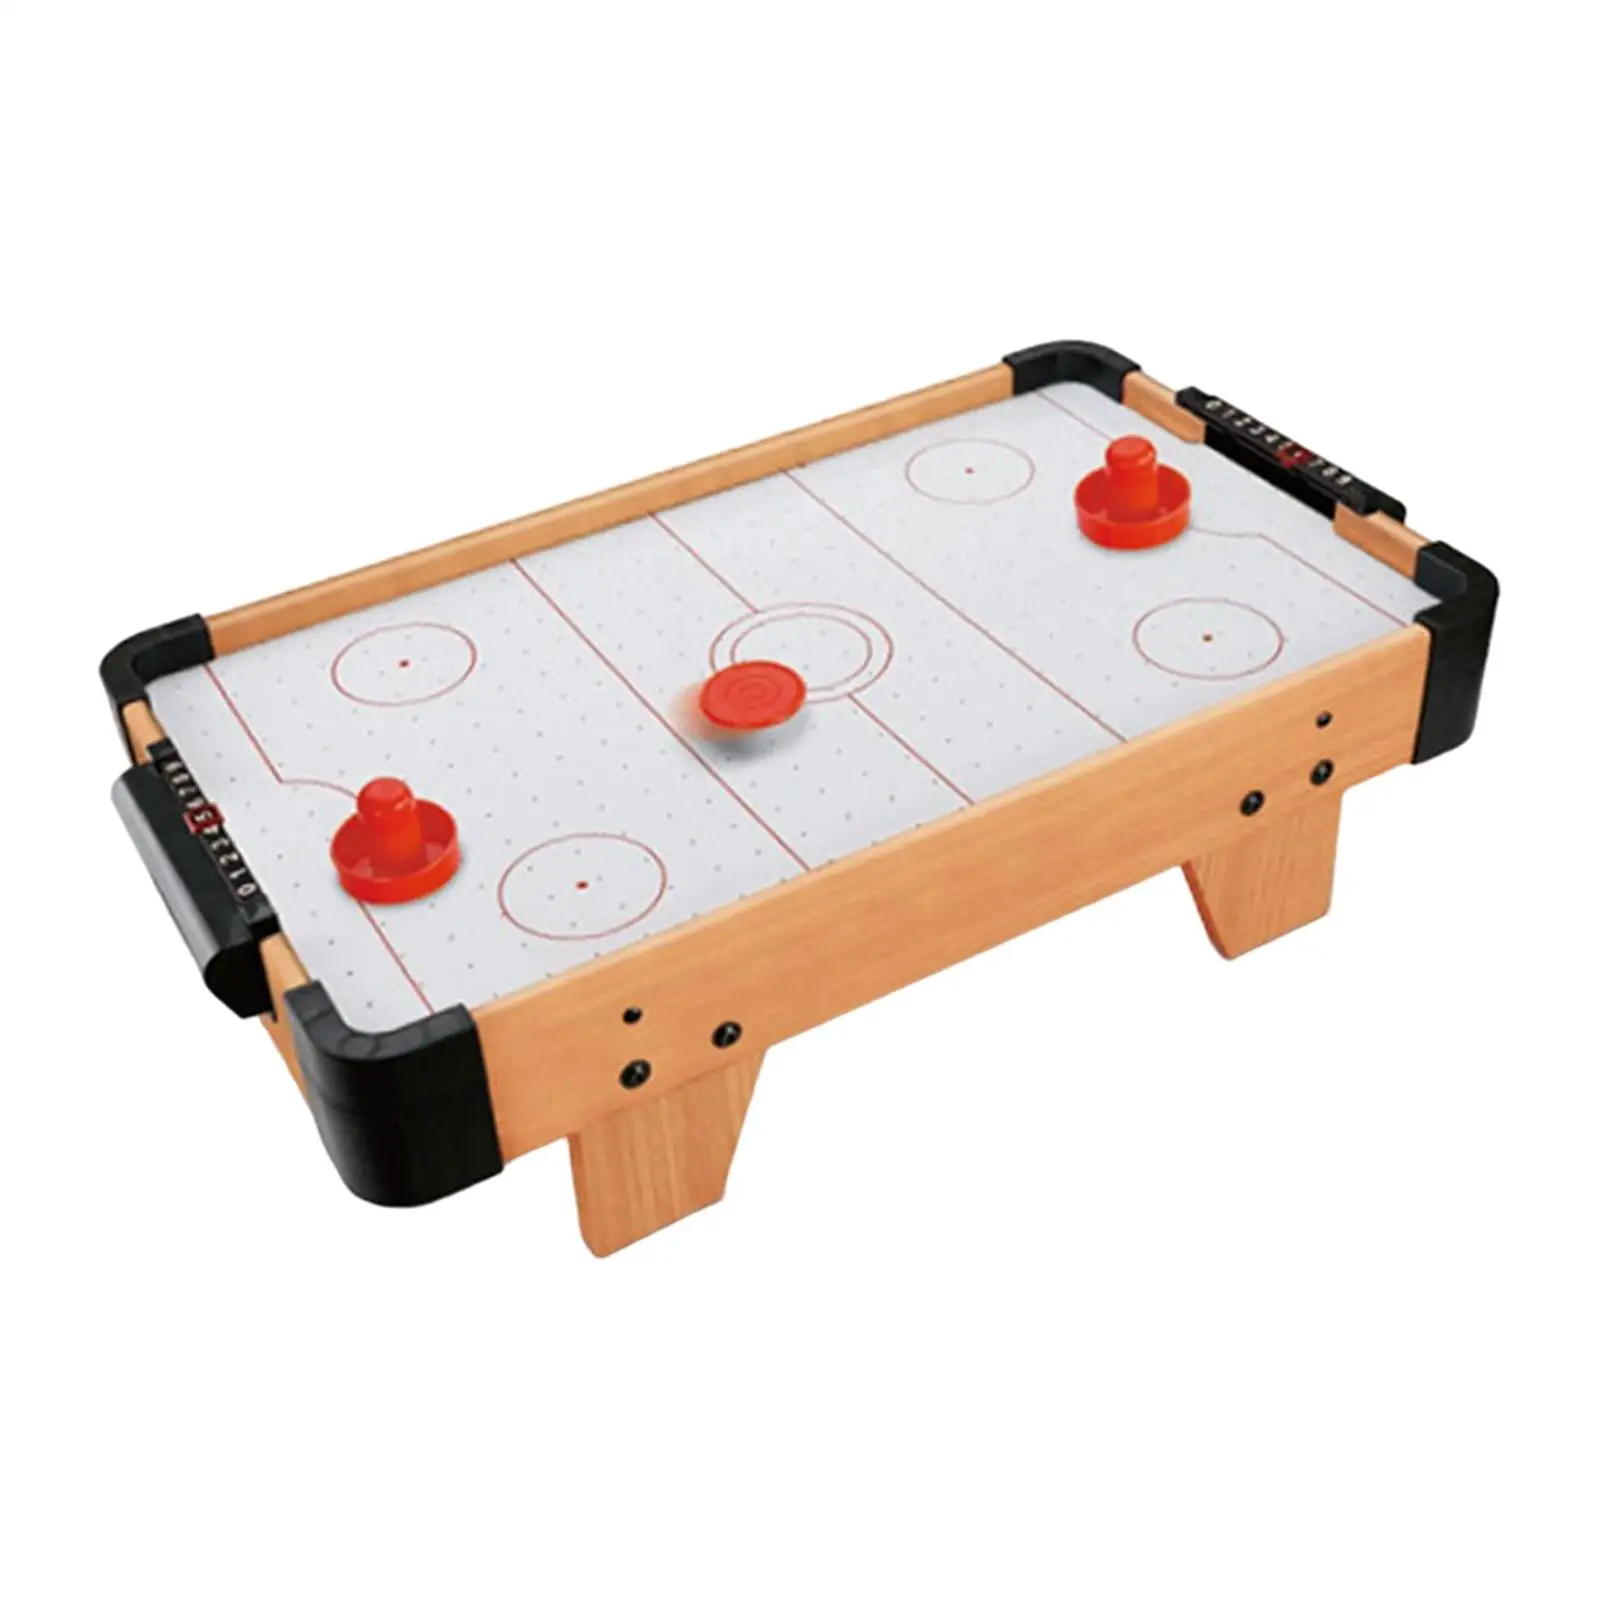 Mini Air Hockey Table,Paced Winner Board Game,Desktop Playing Party for Girls Boys